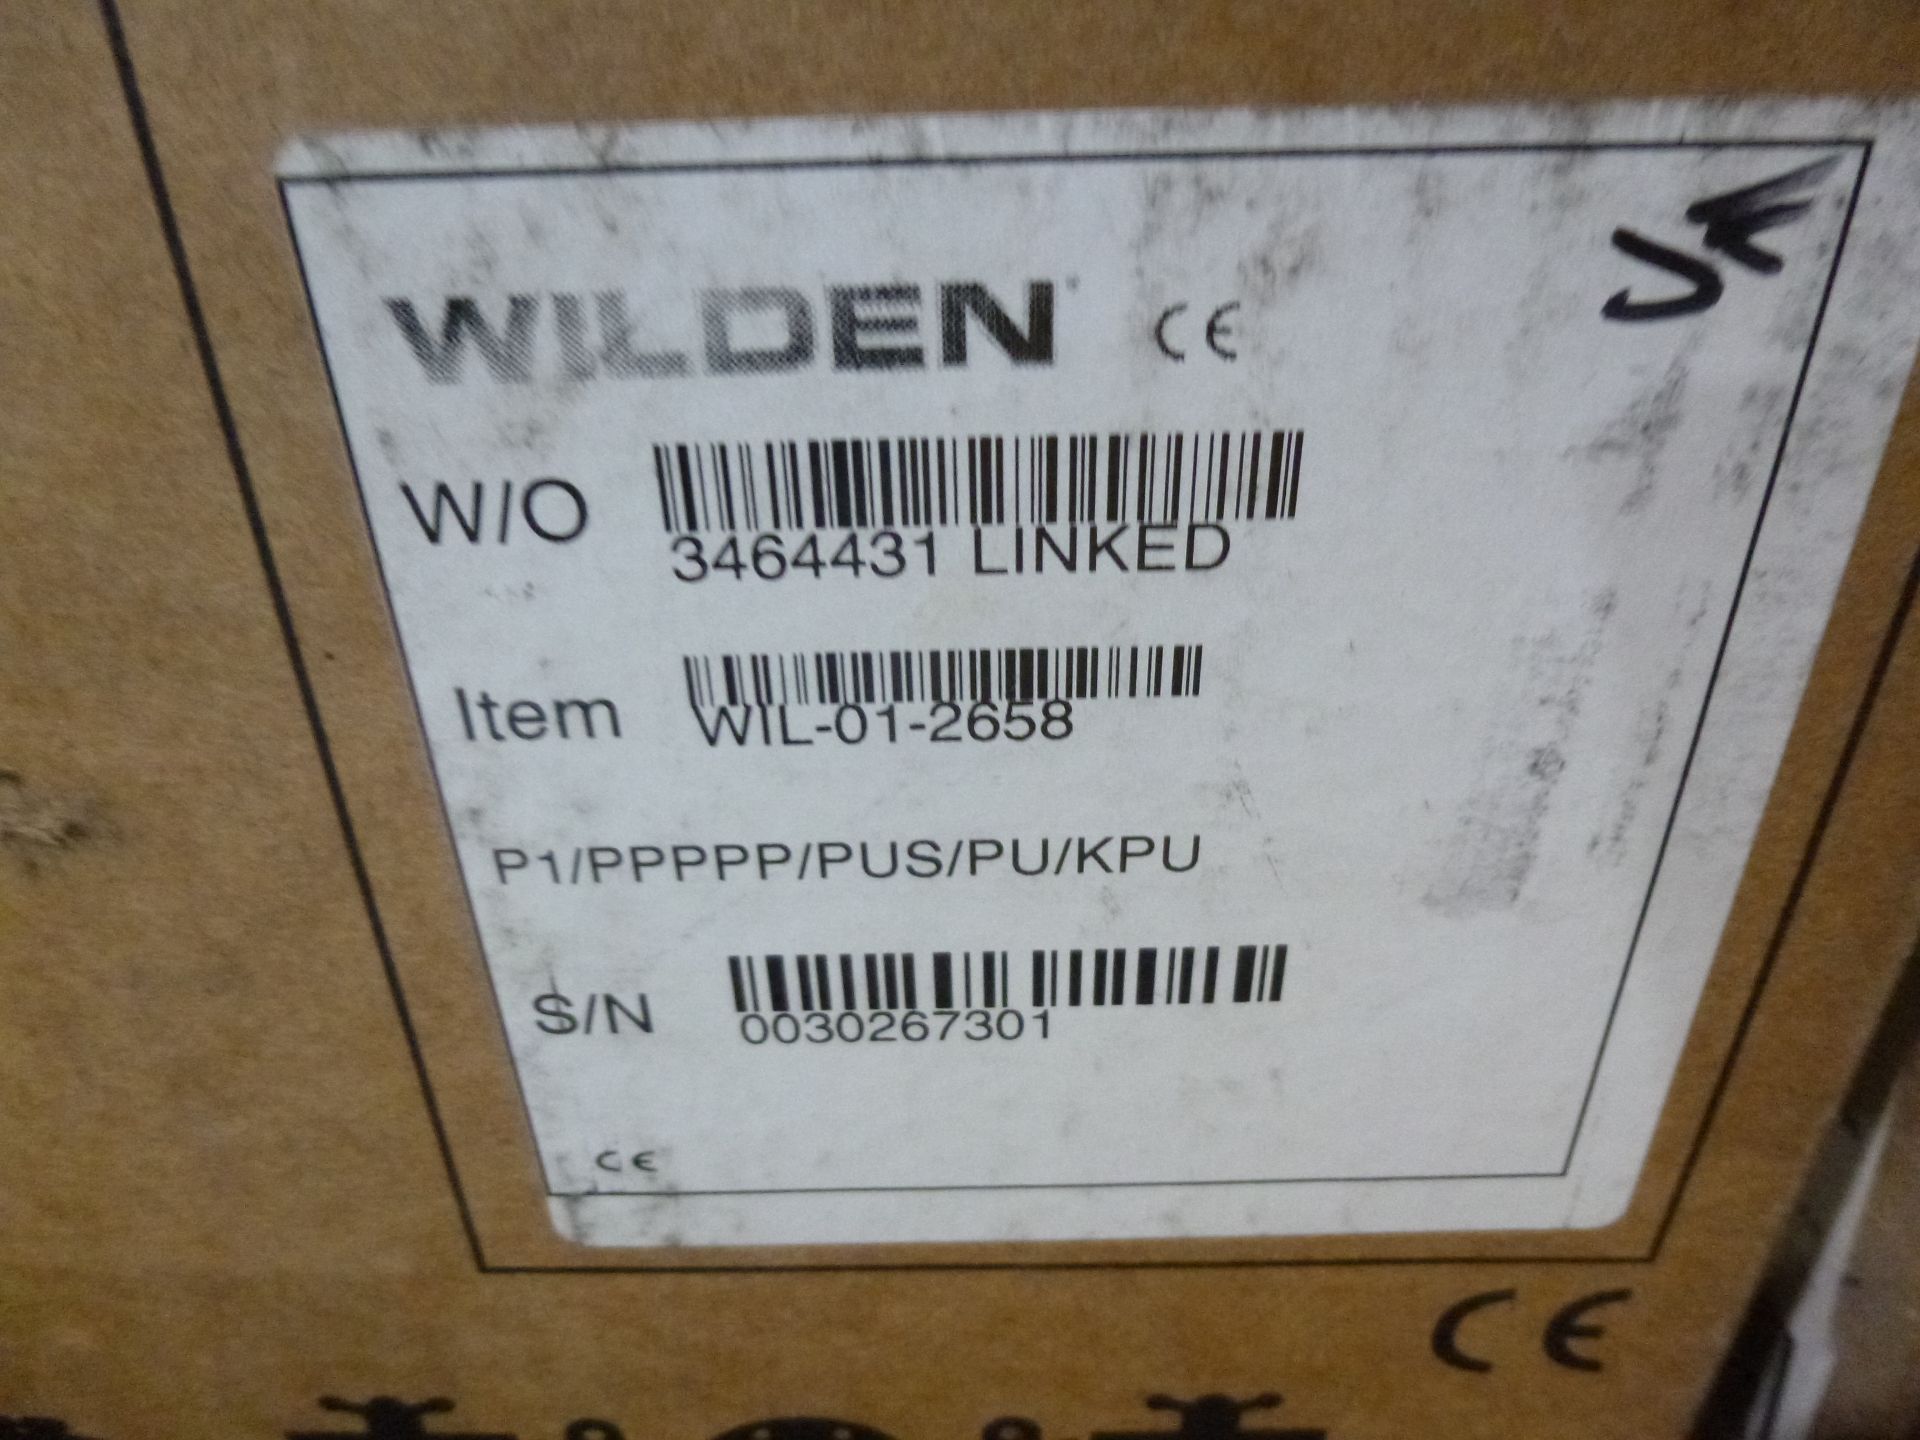 Wilden pump part number P1/PPPPP/PUS/PU/KPU, new in box, as always with Brolyn LLC auctions, all - Image 4 of 4